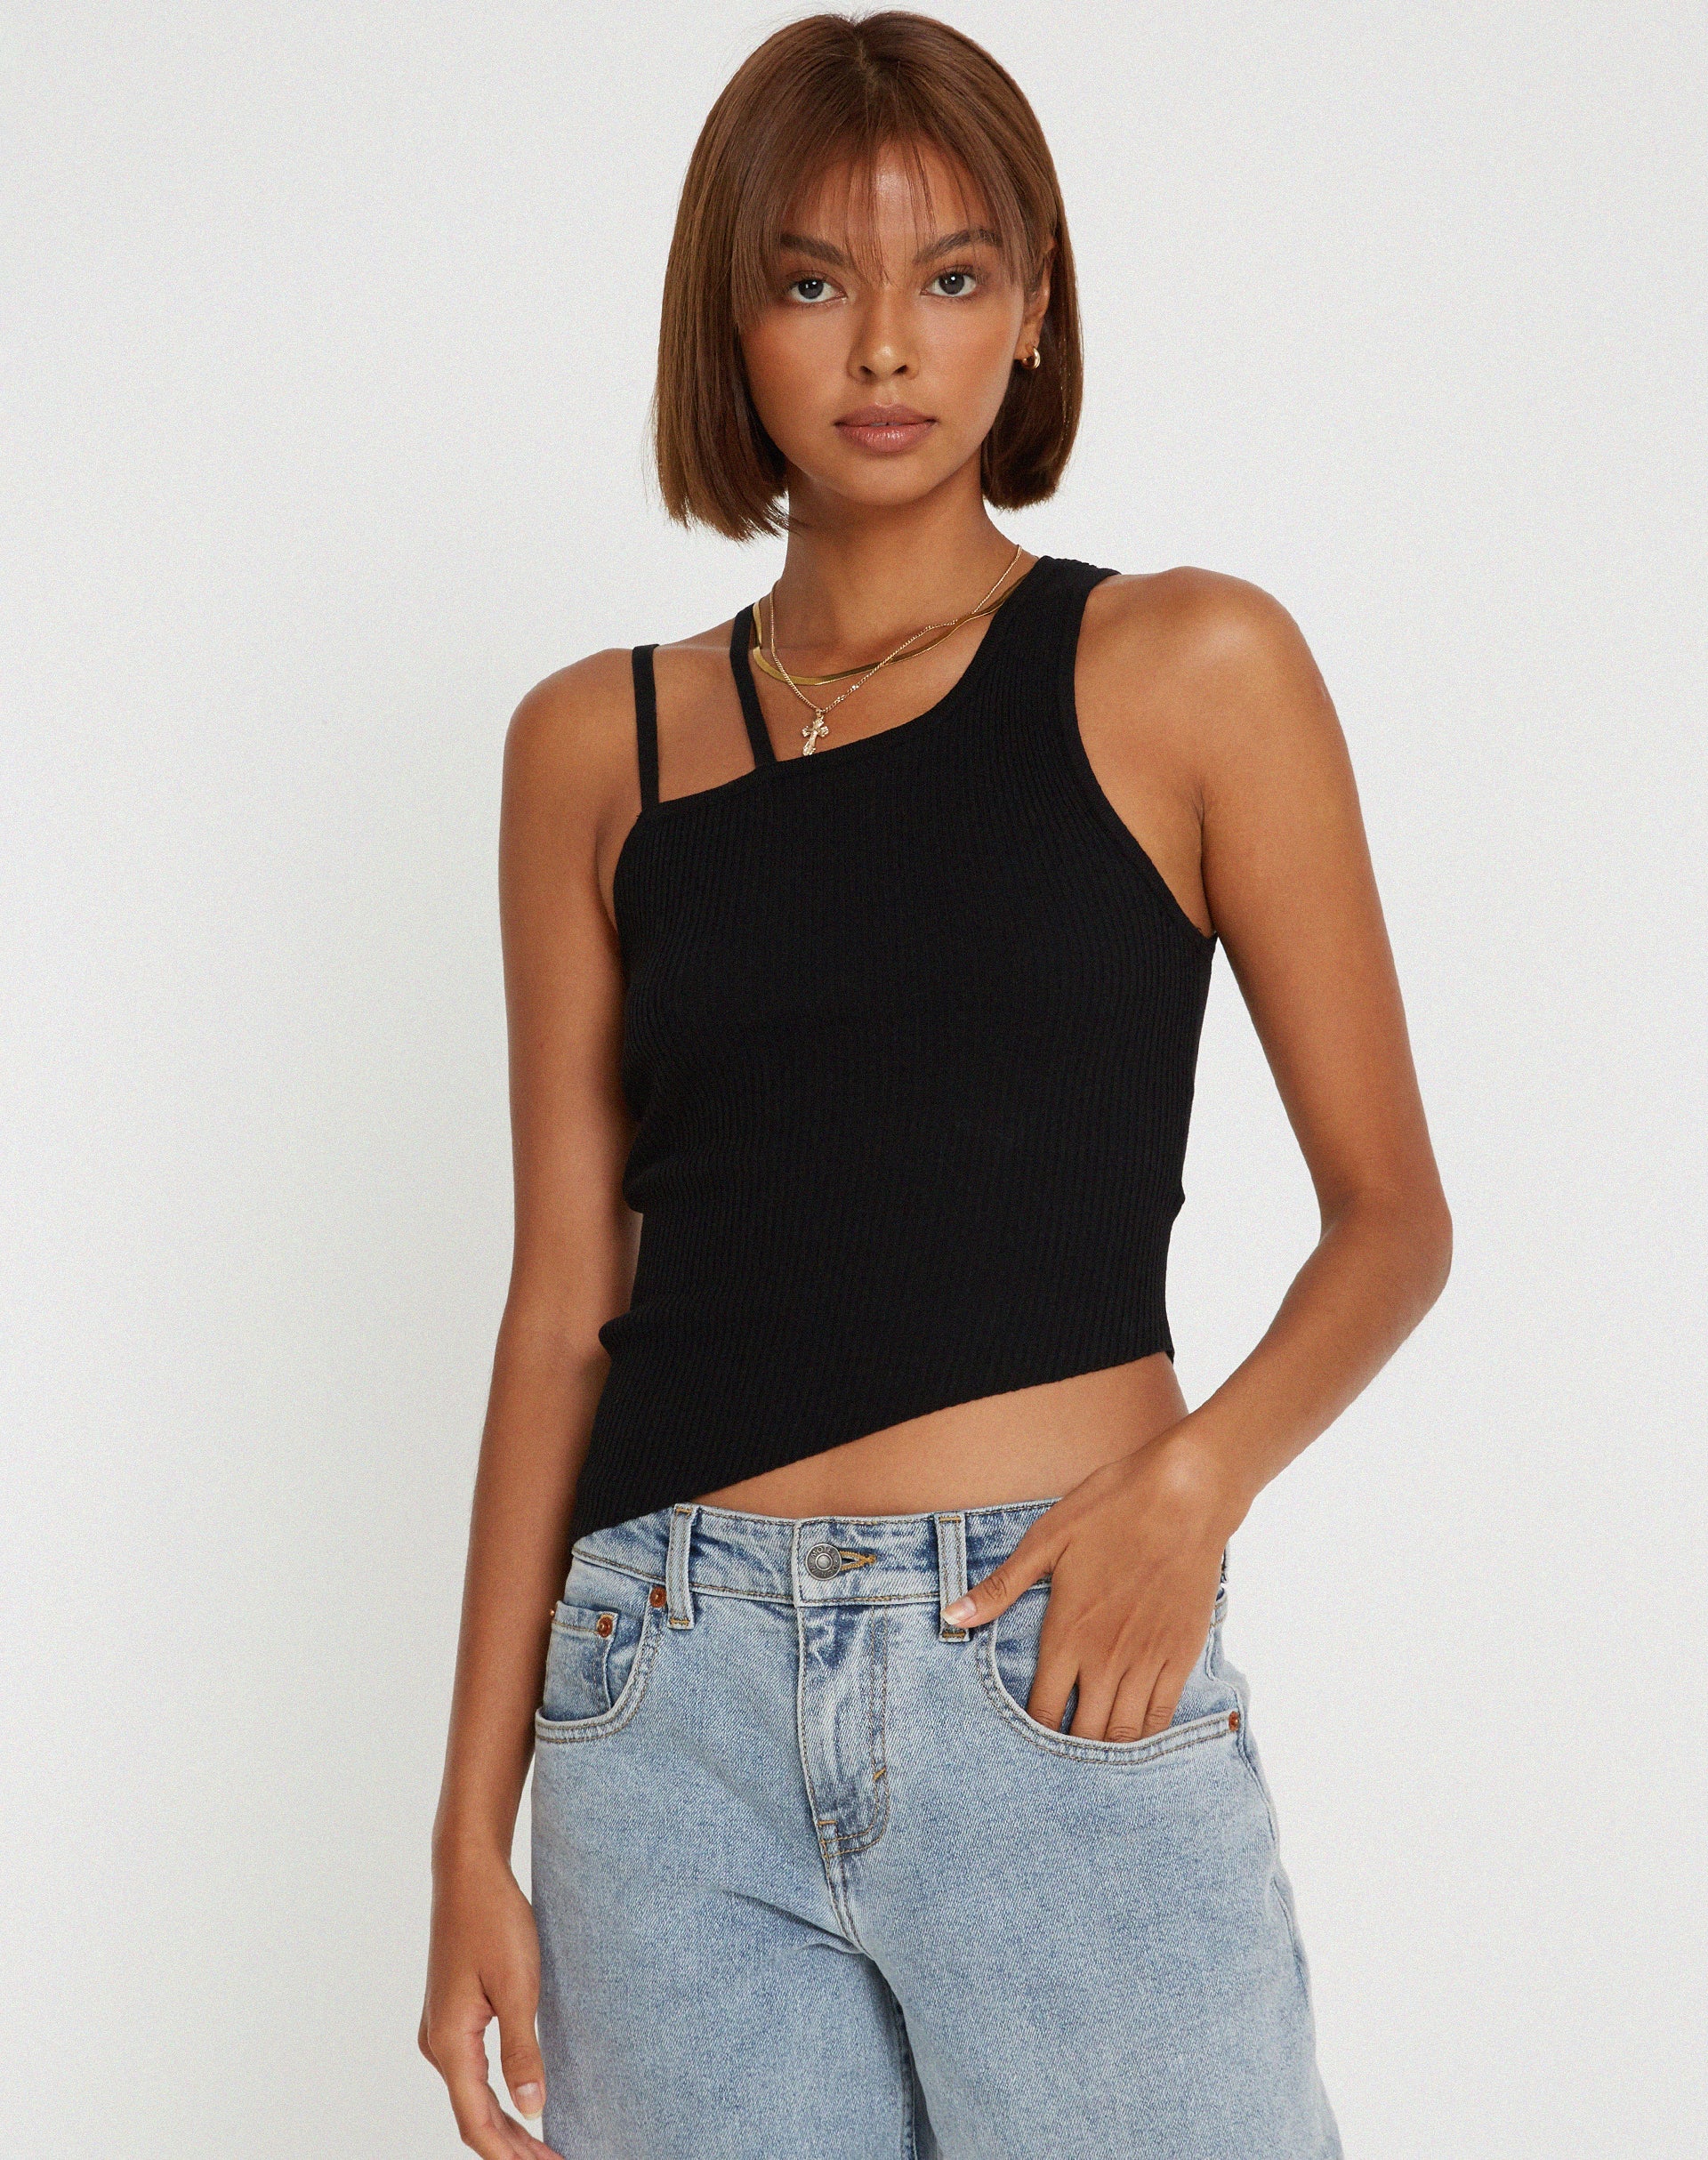 image of Lanica Top in Black